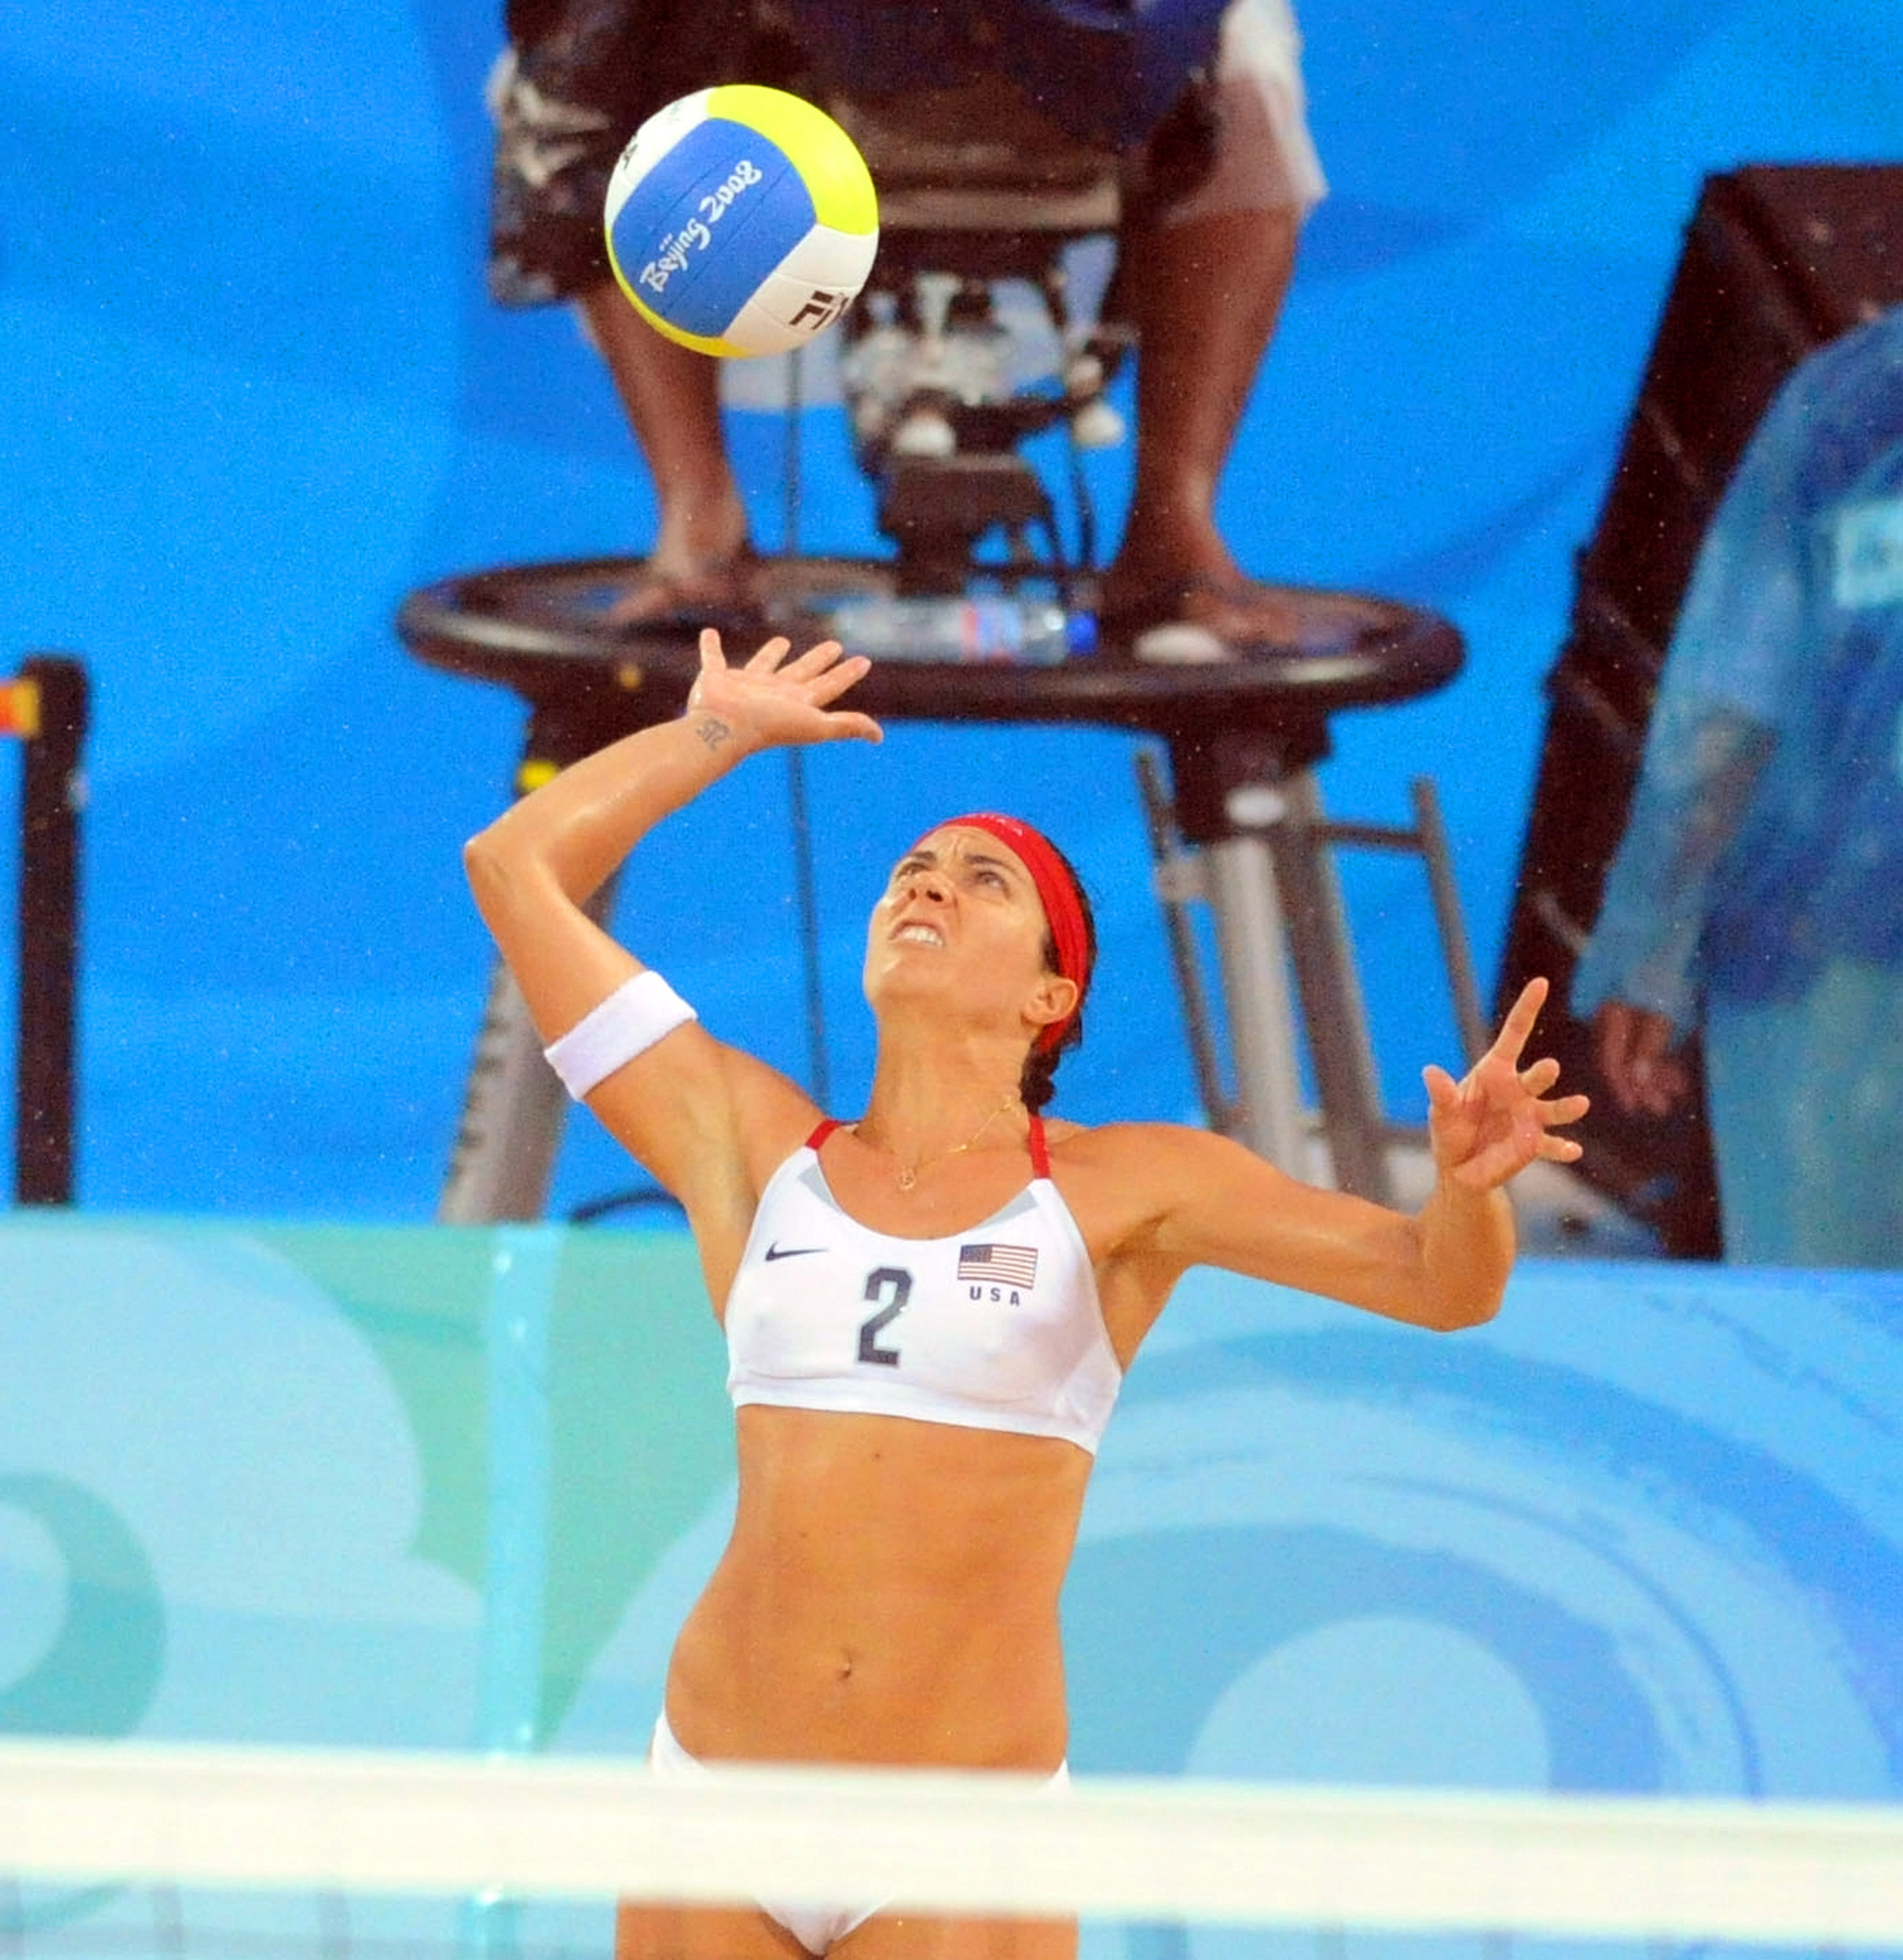 USA Misty-May Treanor serves against China in the gold medal match in Beijing. The USA team won 2-0 to win the Gold.